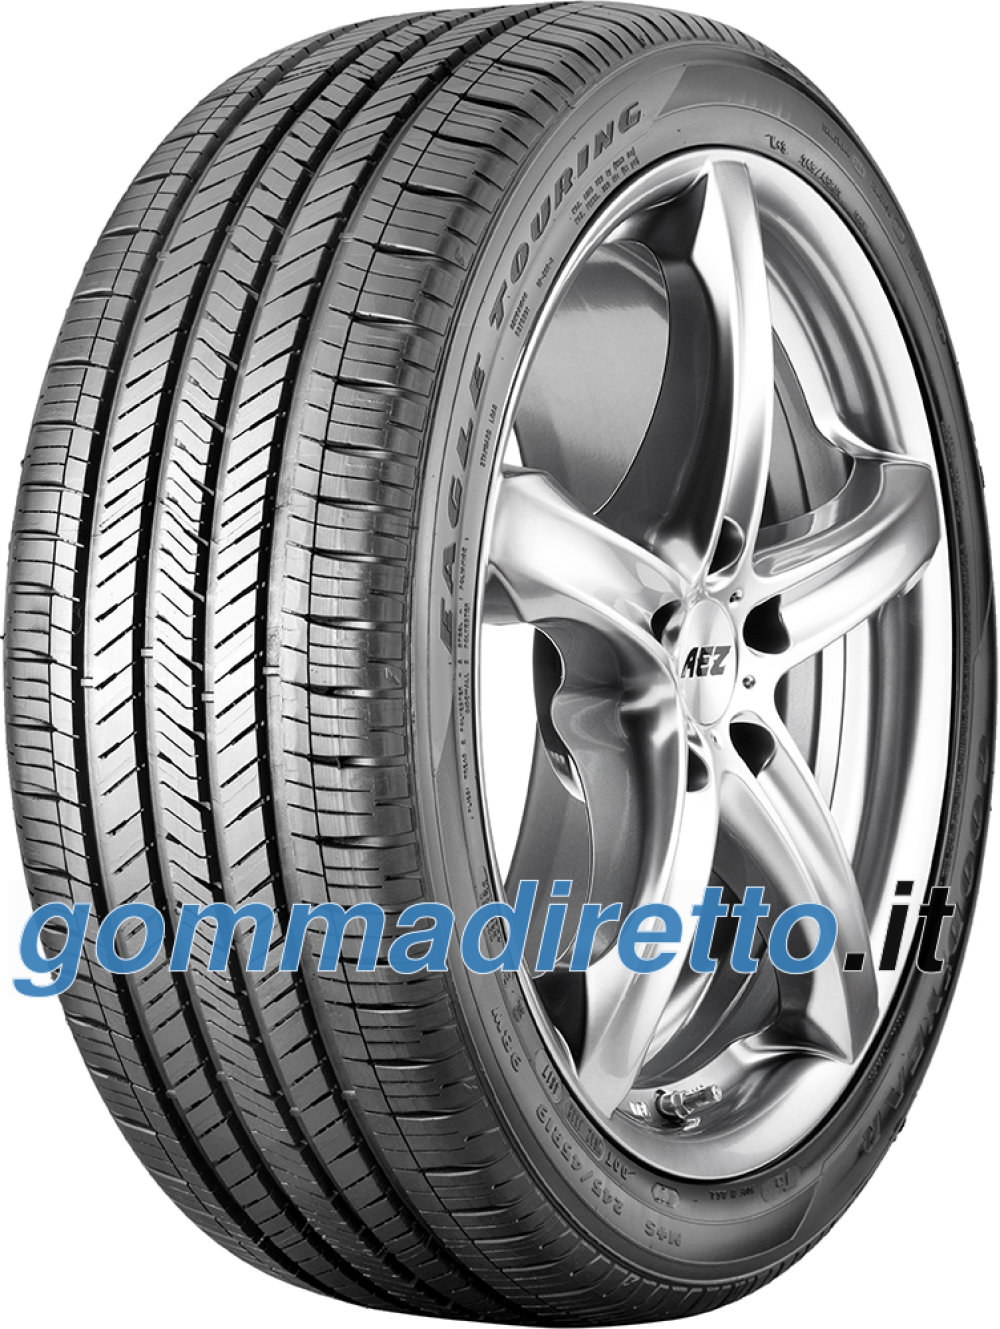 Image of Goodyear Eagle Touring ( 295/40 R20 110W XL EDR, MGT )